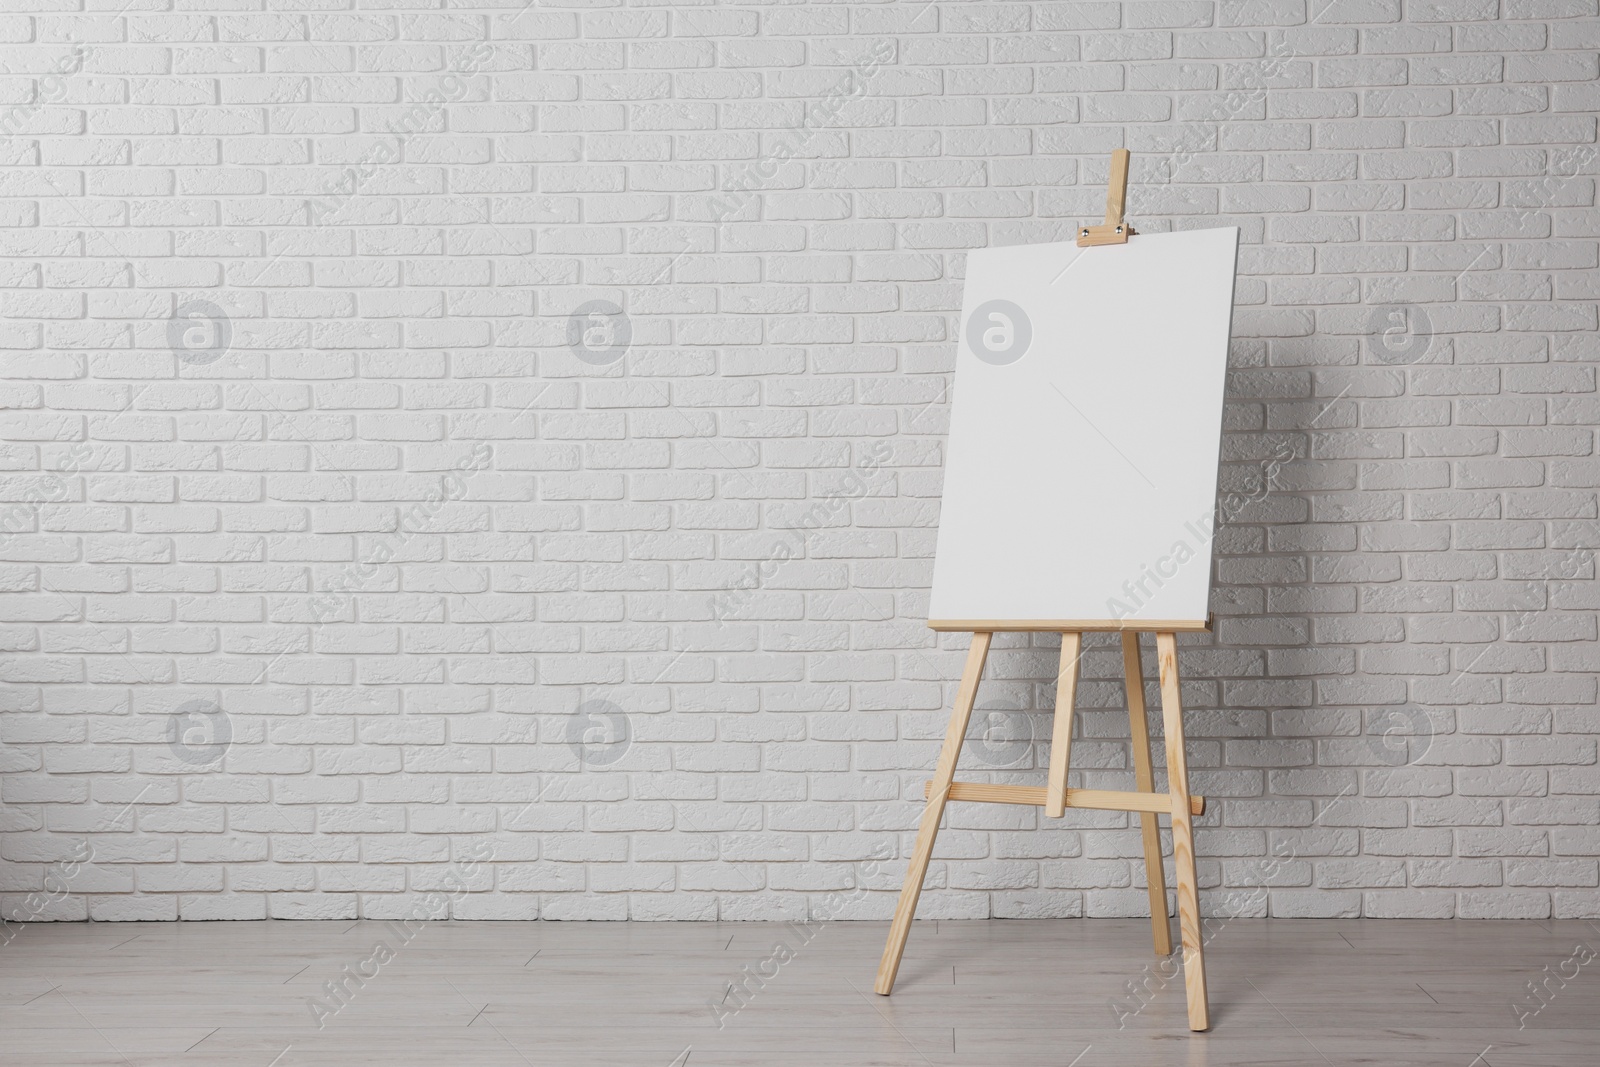 Photo of Wooden easel with blank canvas near white brick wall indoors. Space for text